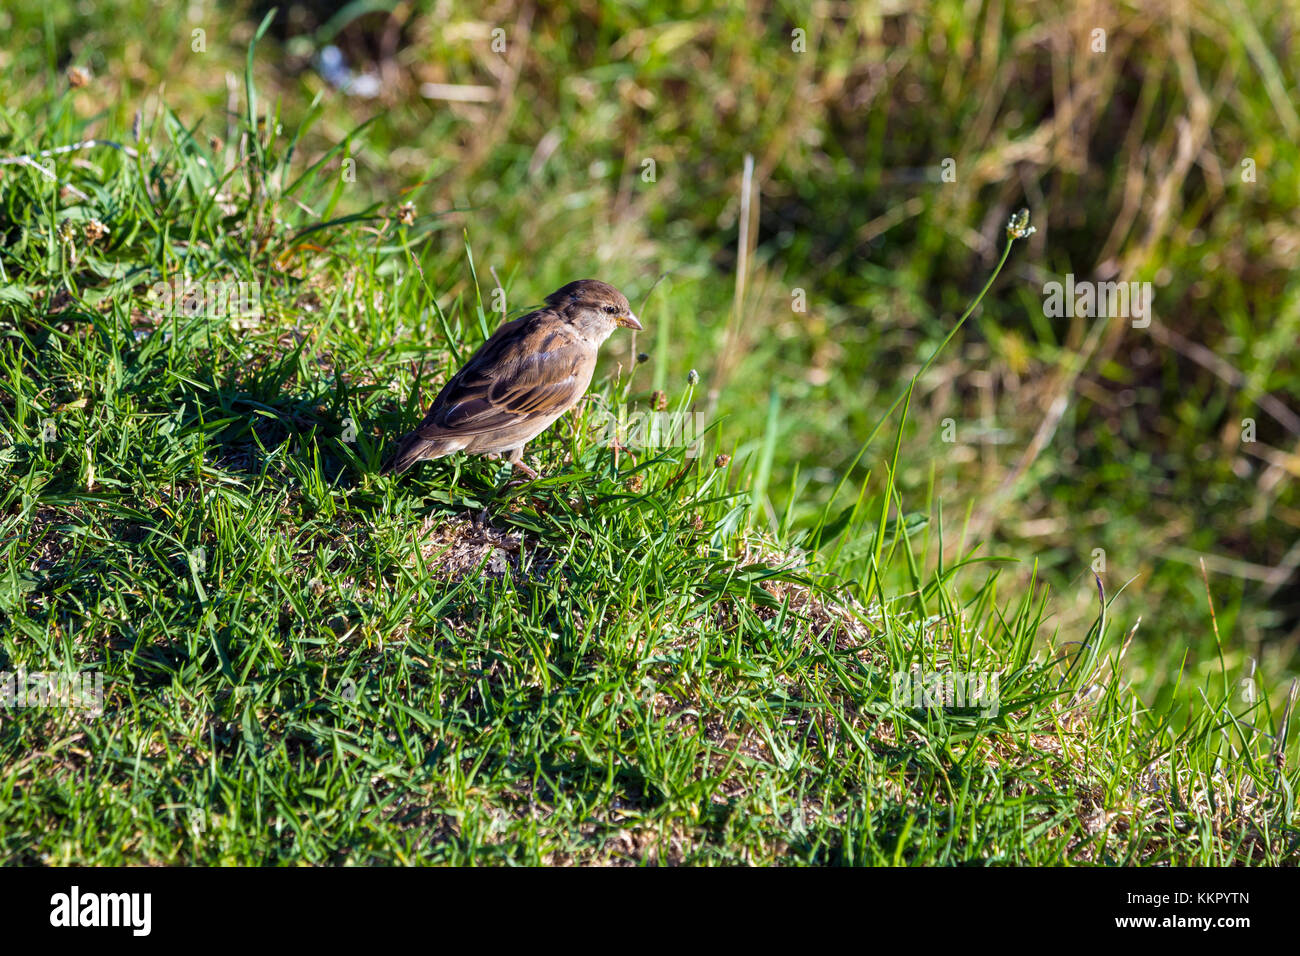 A sparrow sitting in the grass on Mount Victoria, Devonport, Auckland, New Zealand Stock Photo